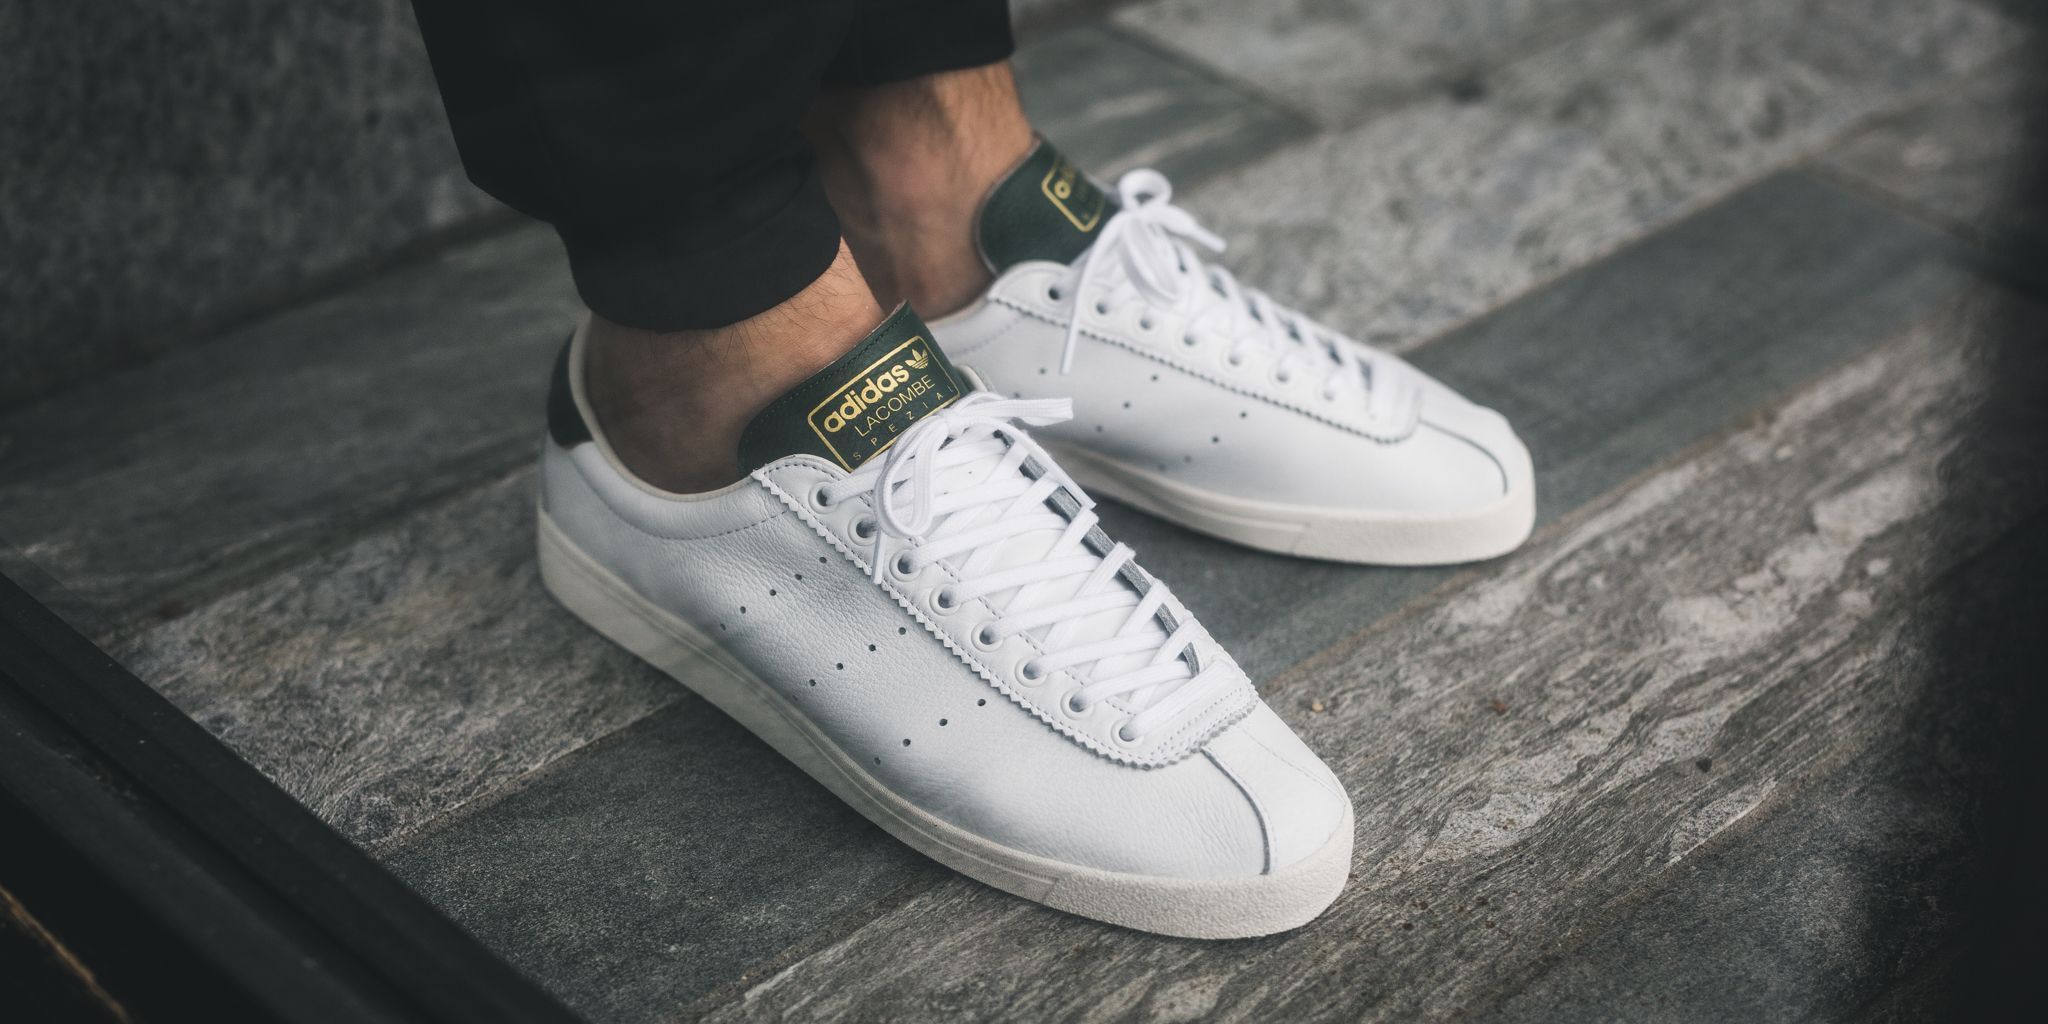 Titolo on Twitter: "ONLINE NOW 🎾 Adidas Lacombe #Spezial "White" SHOP HERE  ➡️ https://t.co/lC6pgZBmc4 #adidasSPEZIAL #adidas #lacombe  https://t.co/QYwOTQsqm3" / Twitter